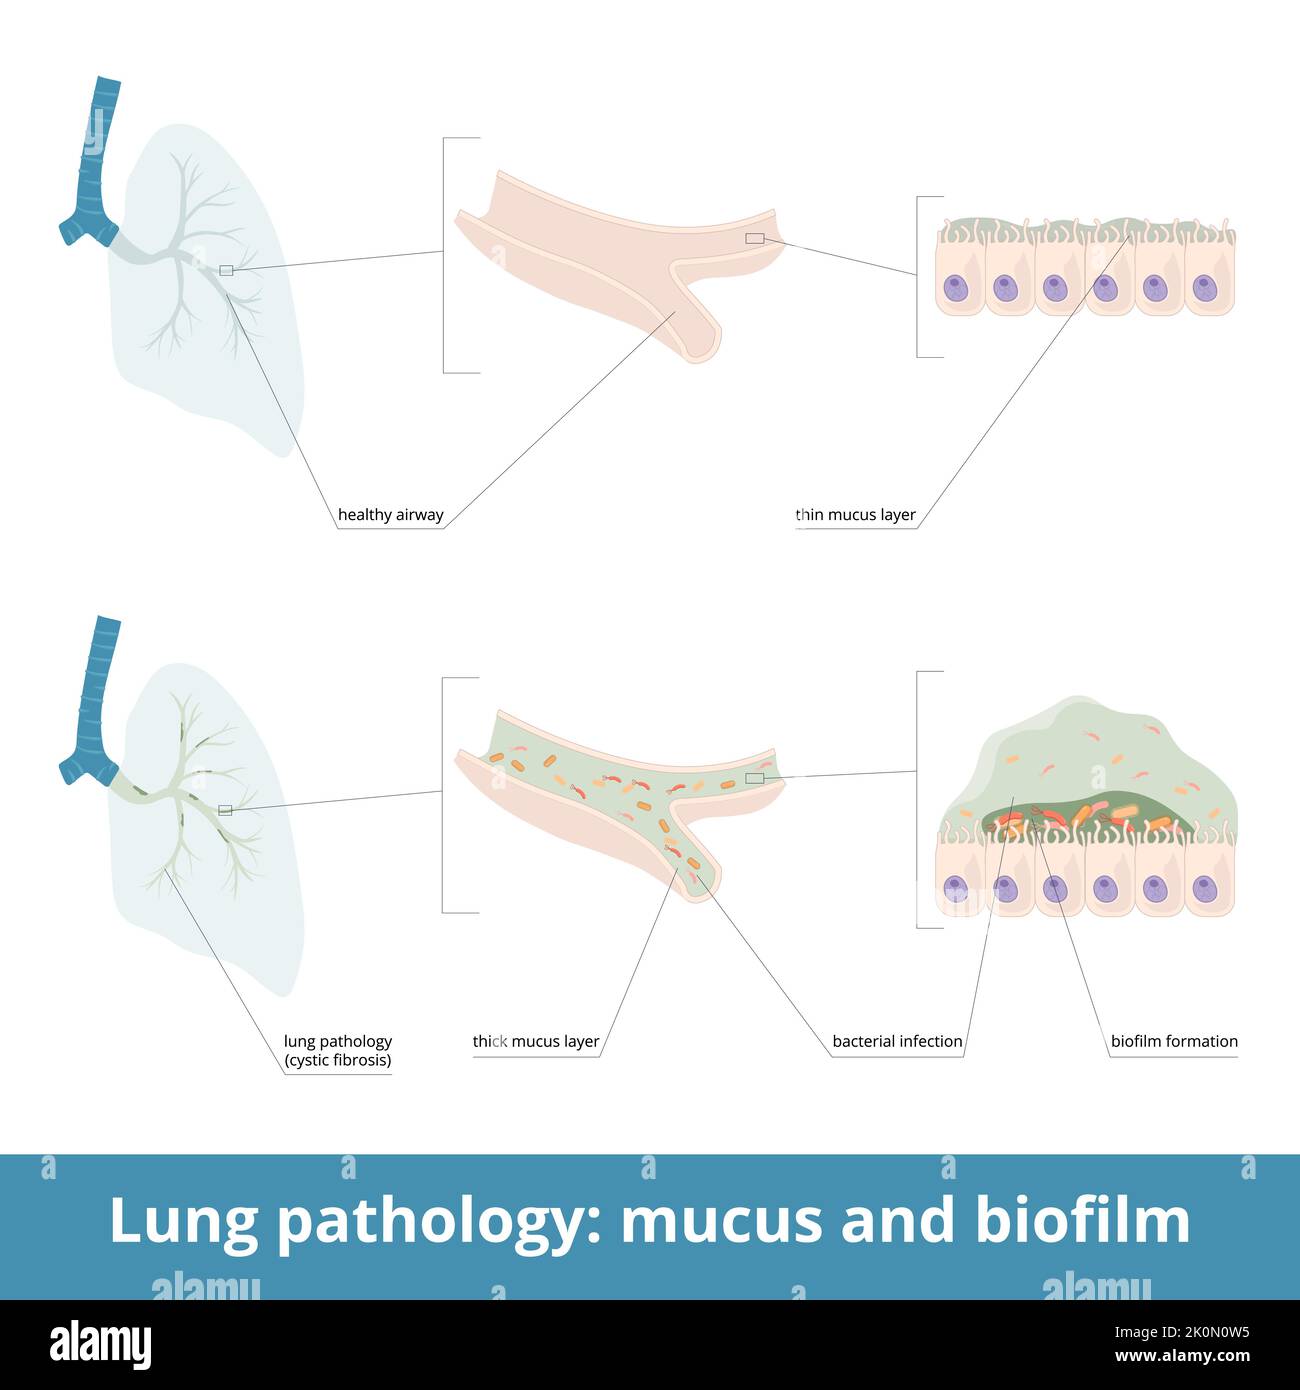 Common lung pathology and excessive mucus. Diseases (cystic fibrosis) may cause formation of thick mucus in airway. Biofilm formation. Stock Vector